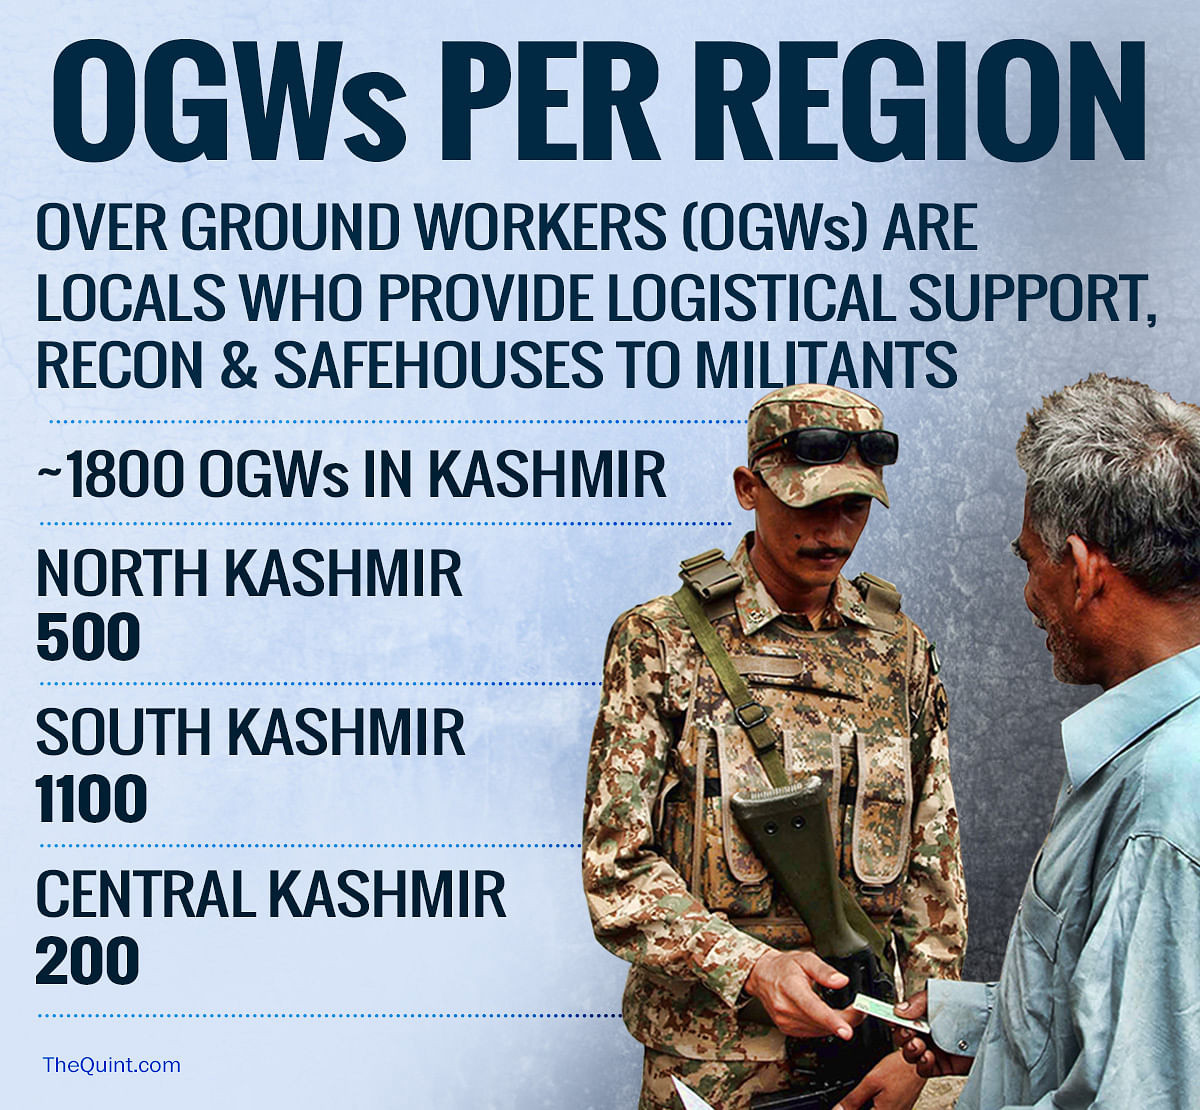 Around 1,800 Over Ground Workers are aiding militants with logistics in Kashmir, say IB sources.